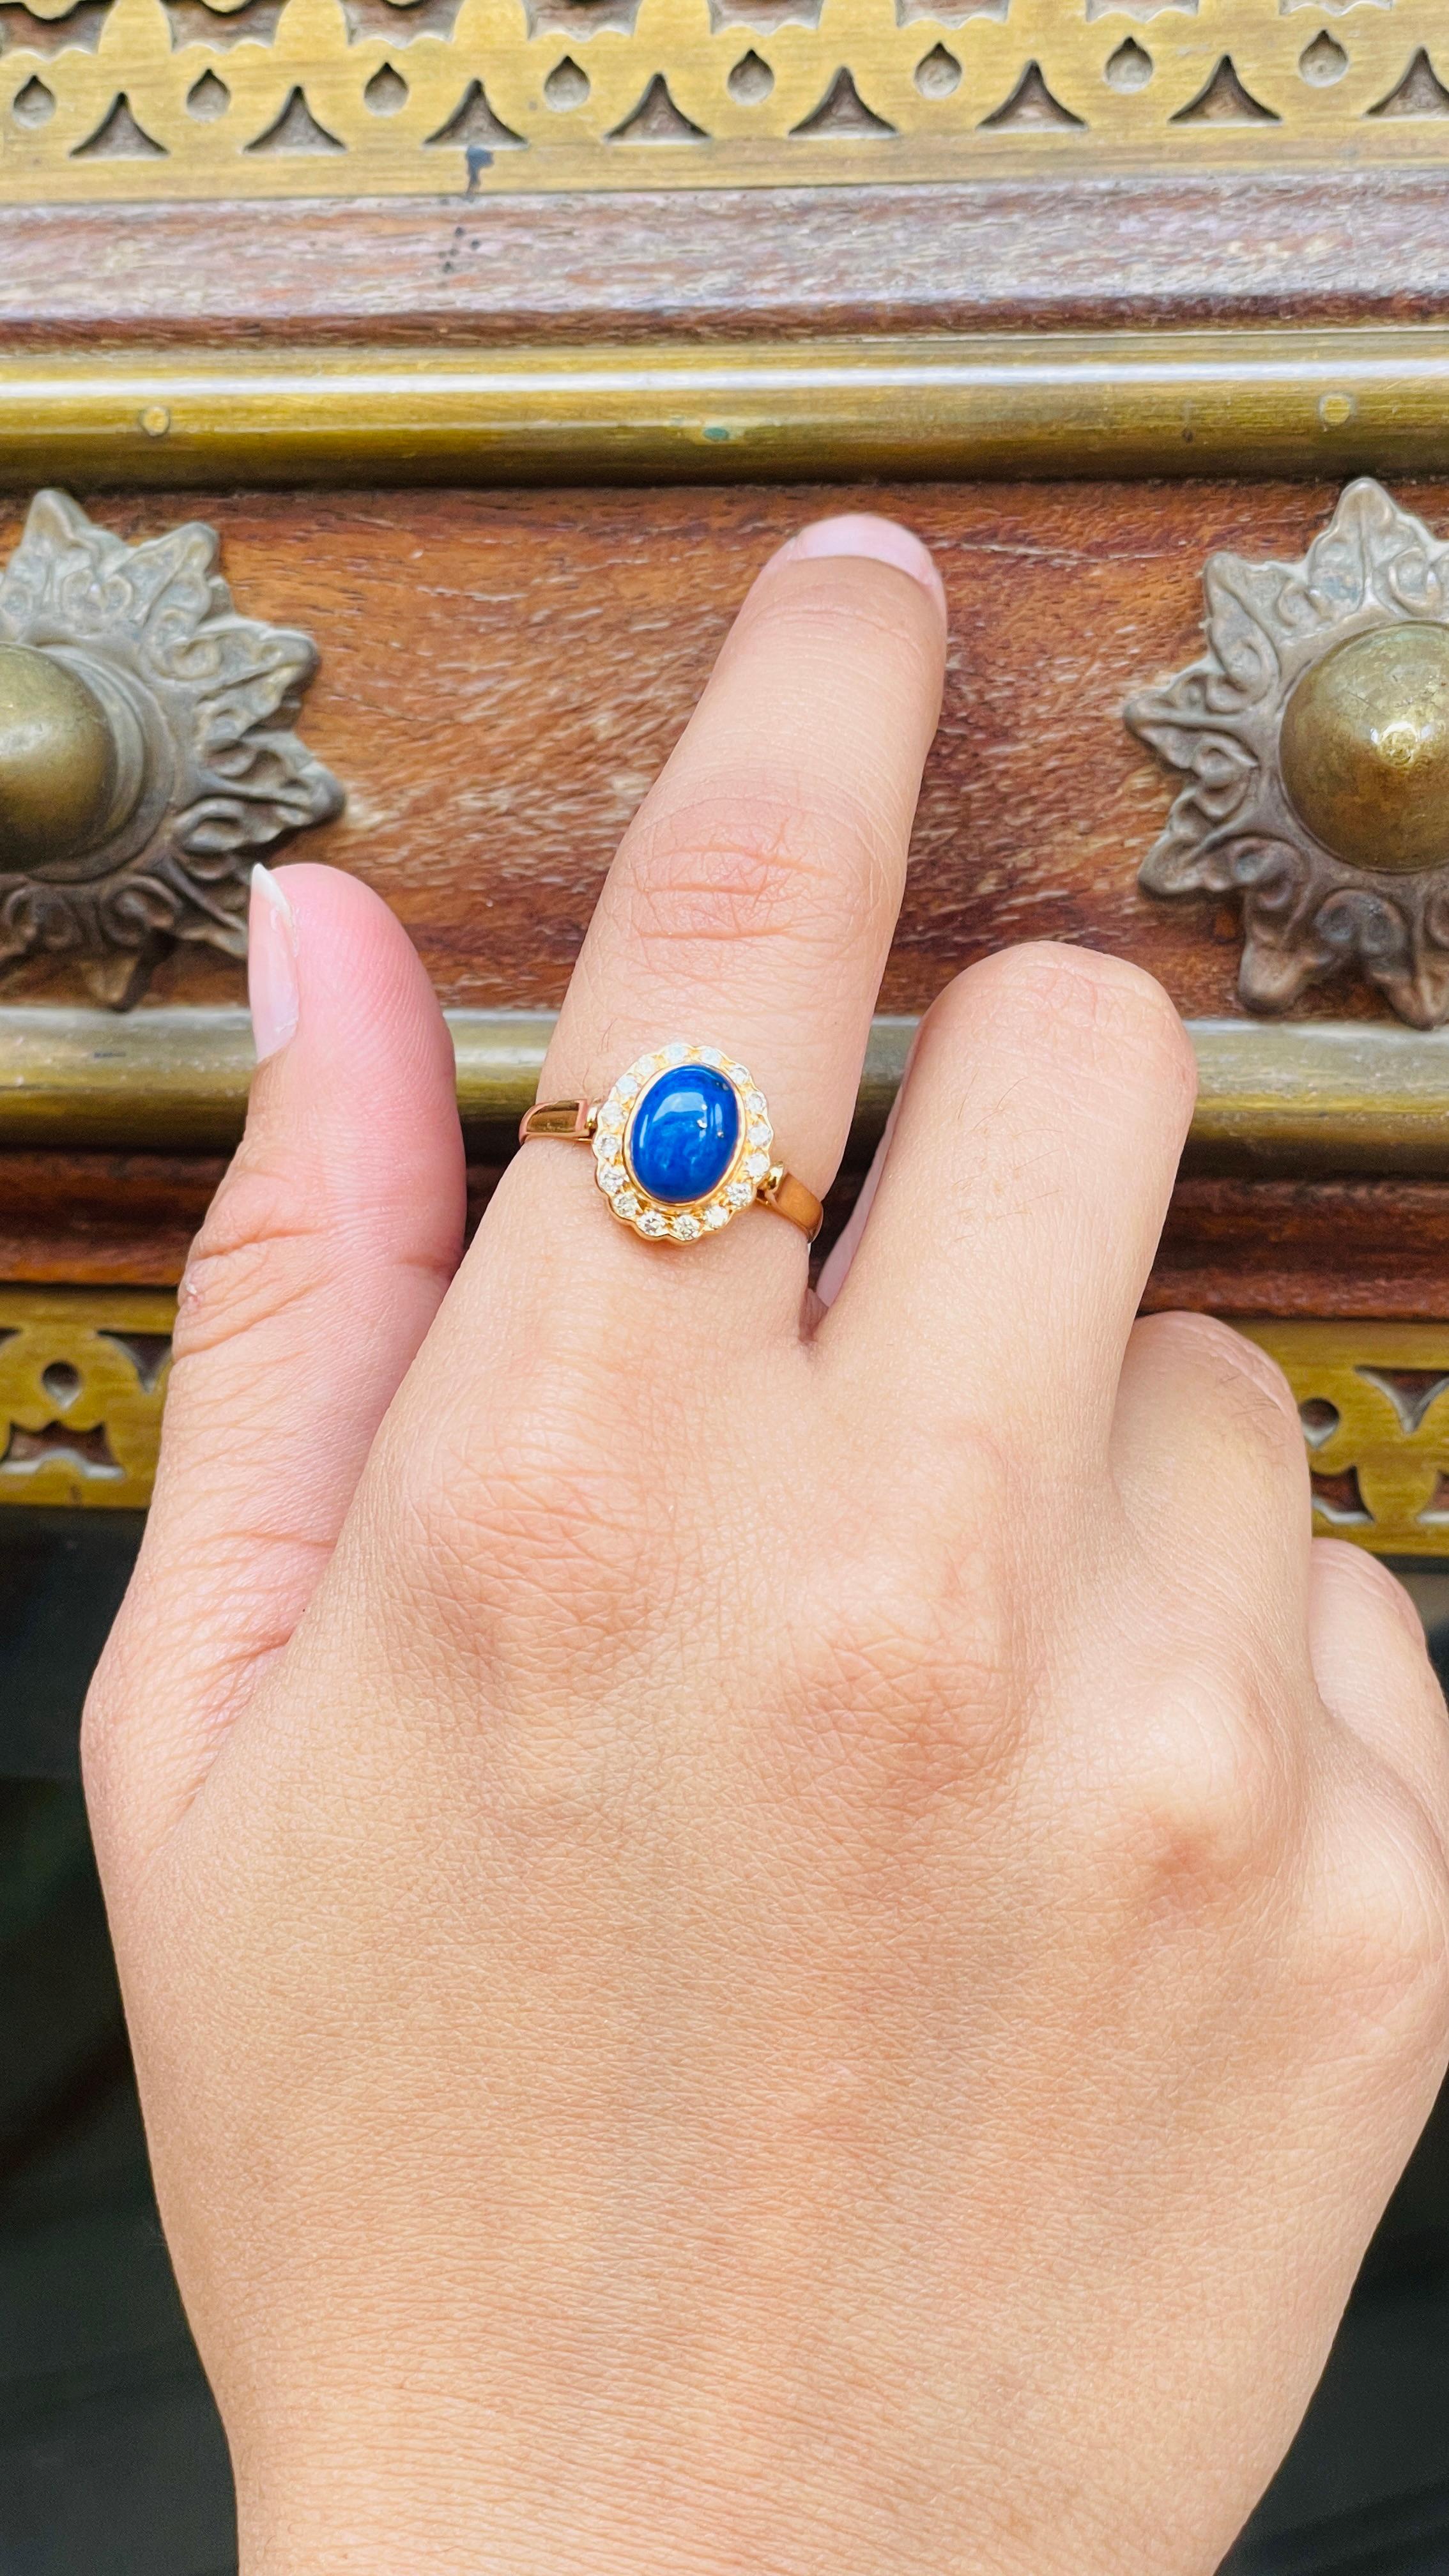 For Sale:  18K Yellow Gold 1.15 Carat Lapis Lazuli with Halo Diamond Cocktail Ring 10